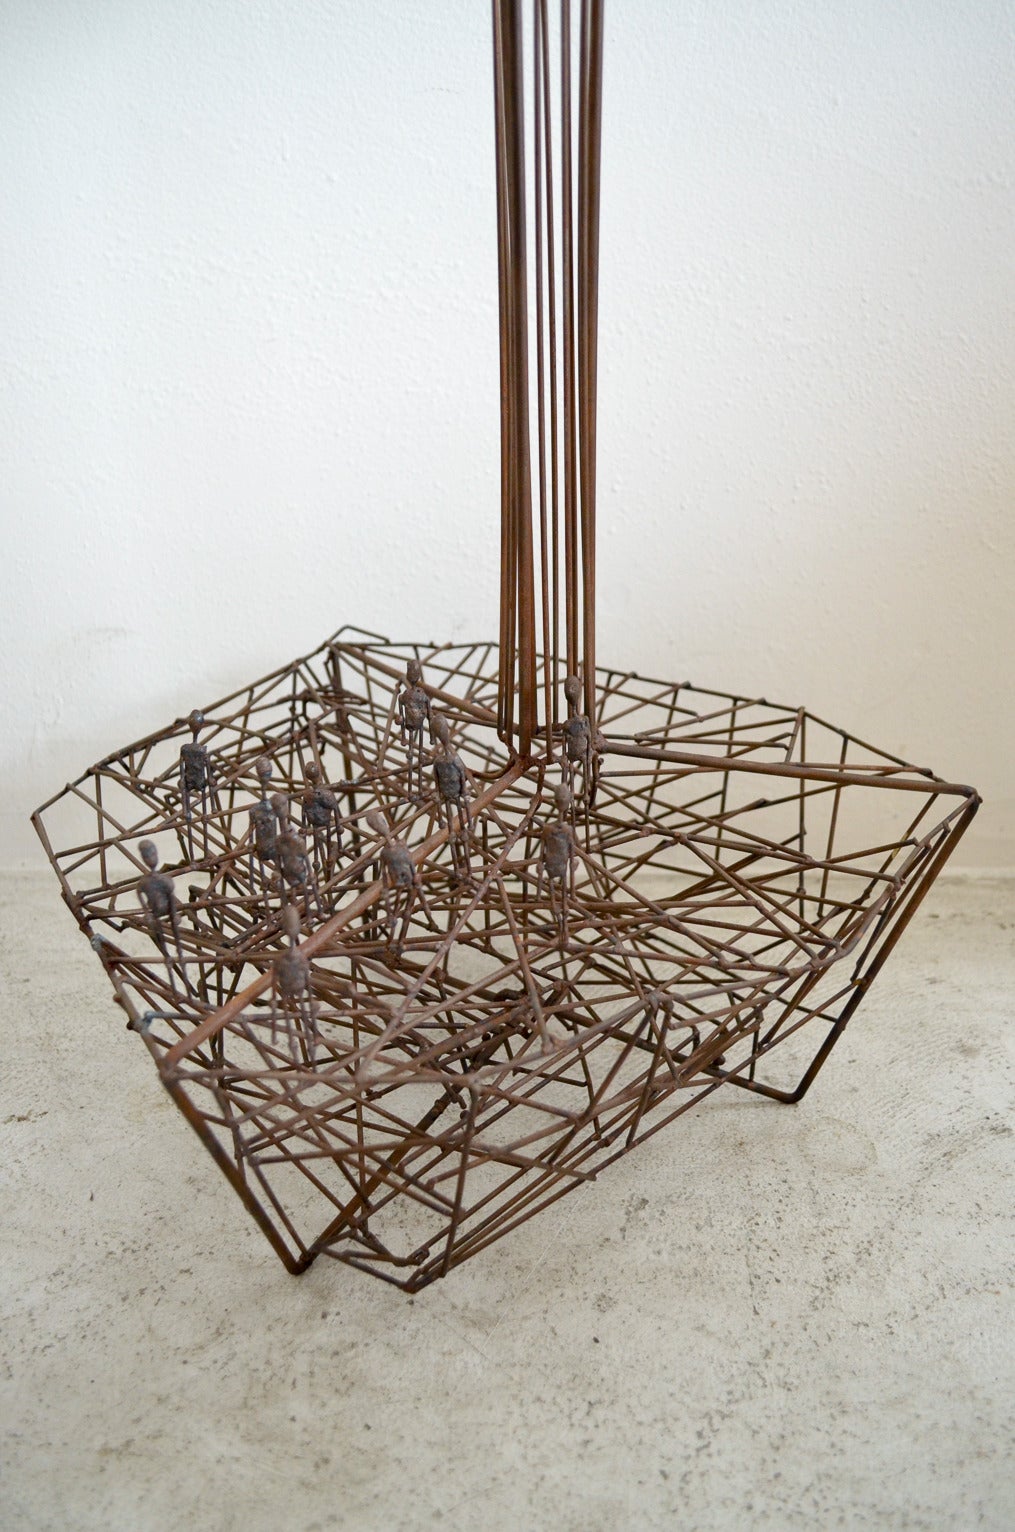 Amazing and rare large kinetic wire sculpture by artist Guy Pullen. Three marble balls enter at the top of the sculpture and make their way down to the bottom of the tower. Original one of a kind piece, this is a great conversation piece for your